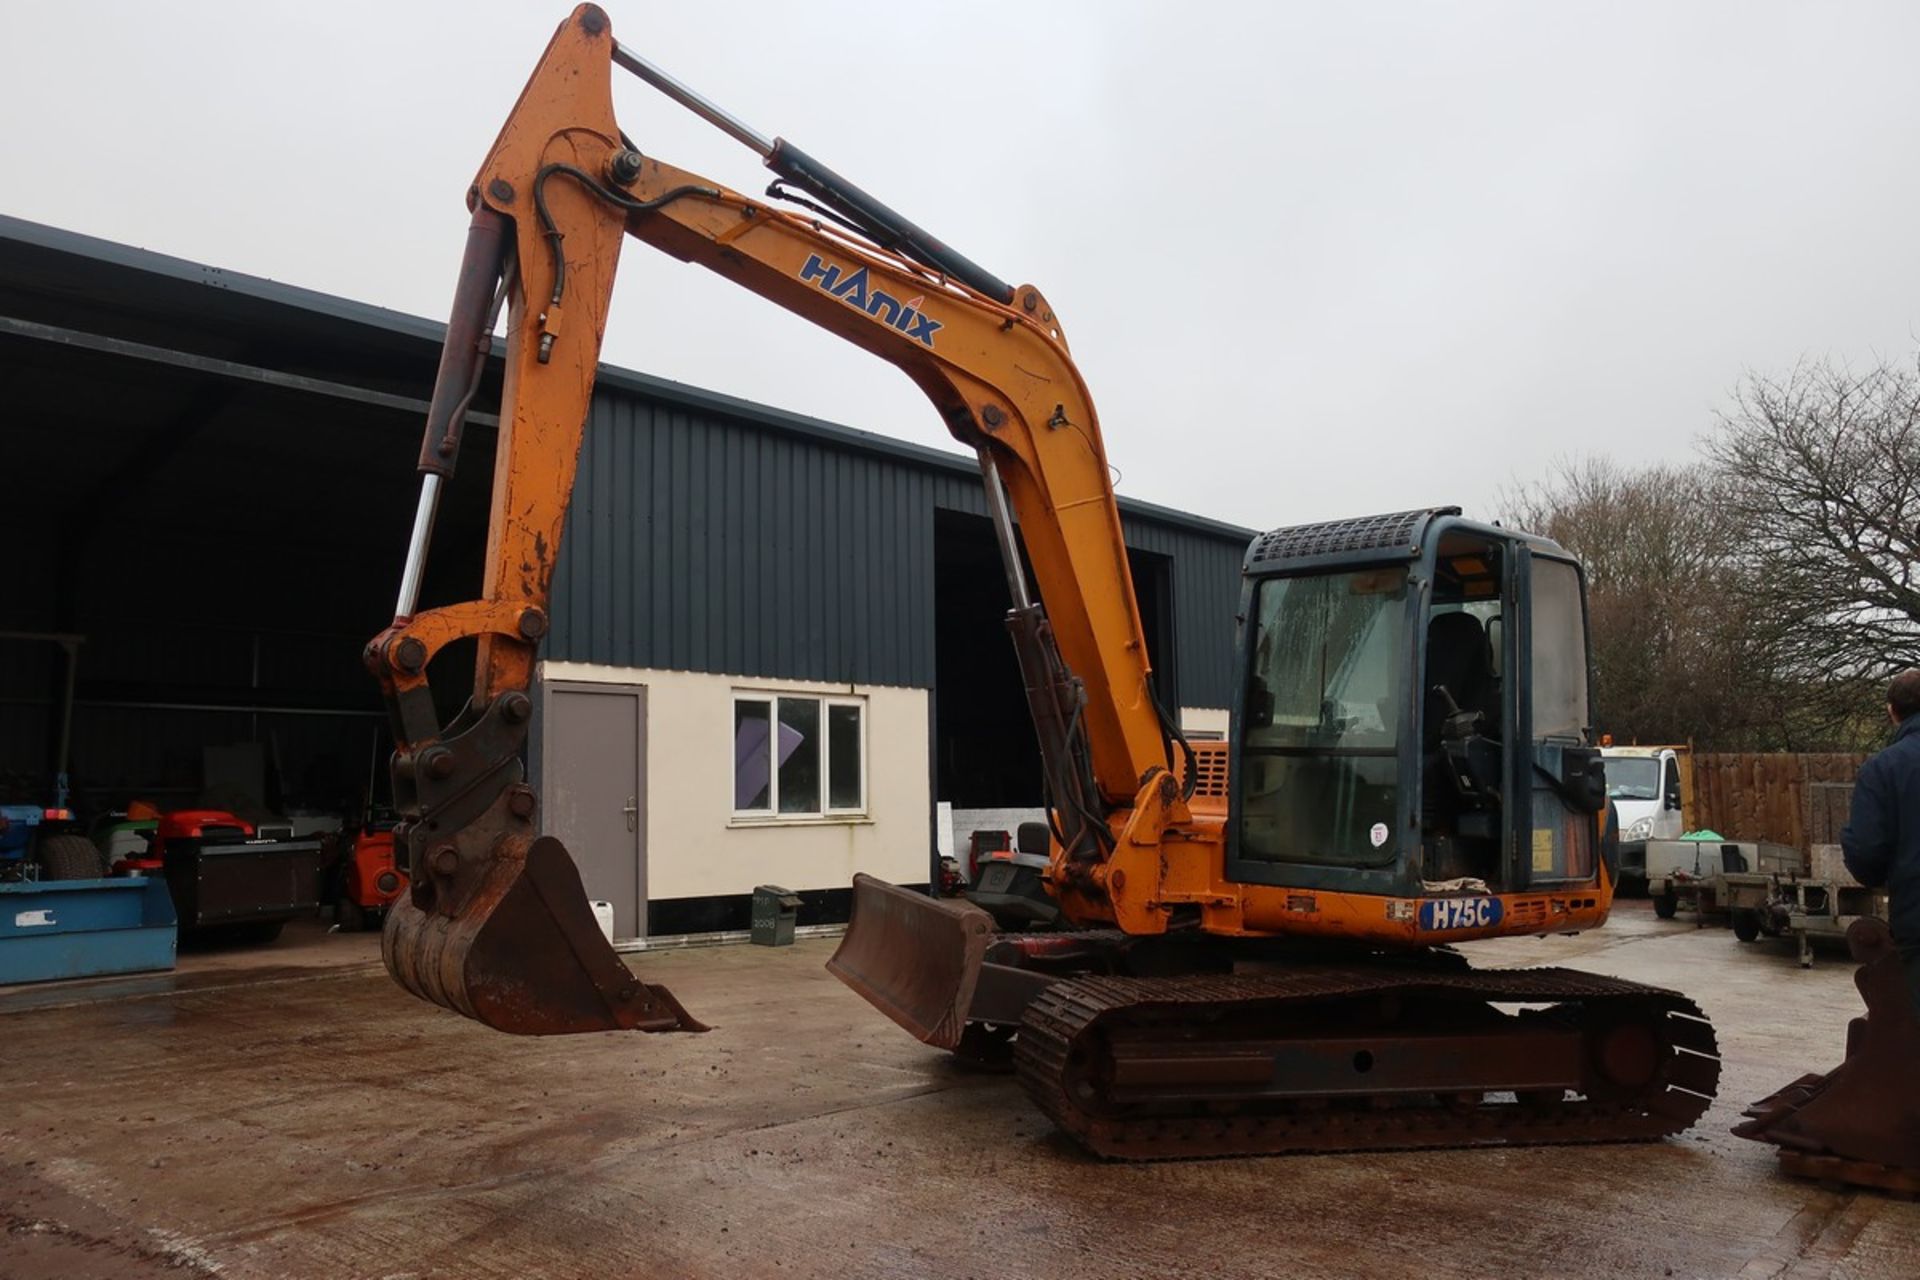 COMING FOR MARCH'S SALE GENUINE UNRESERVED DISPERSAL SALE ON BEHALF OF A LOCAL GROUNDWORKER